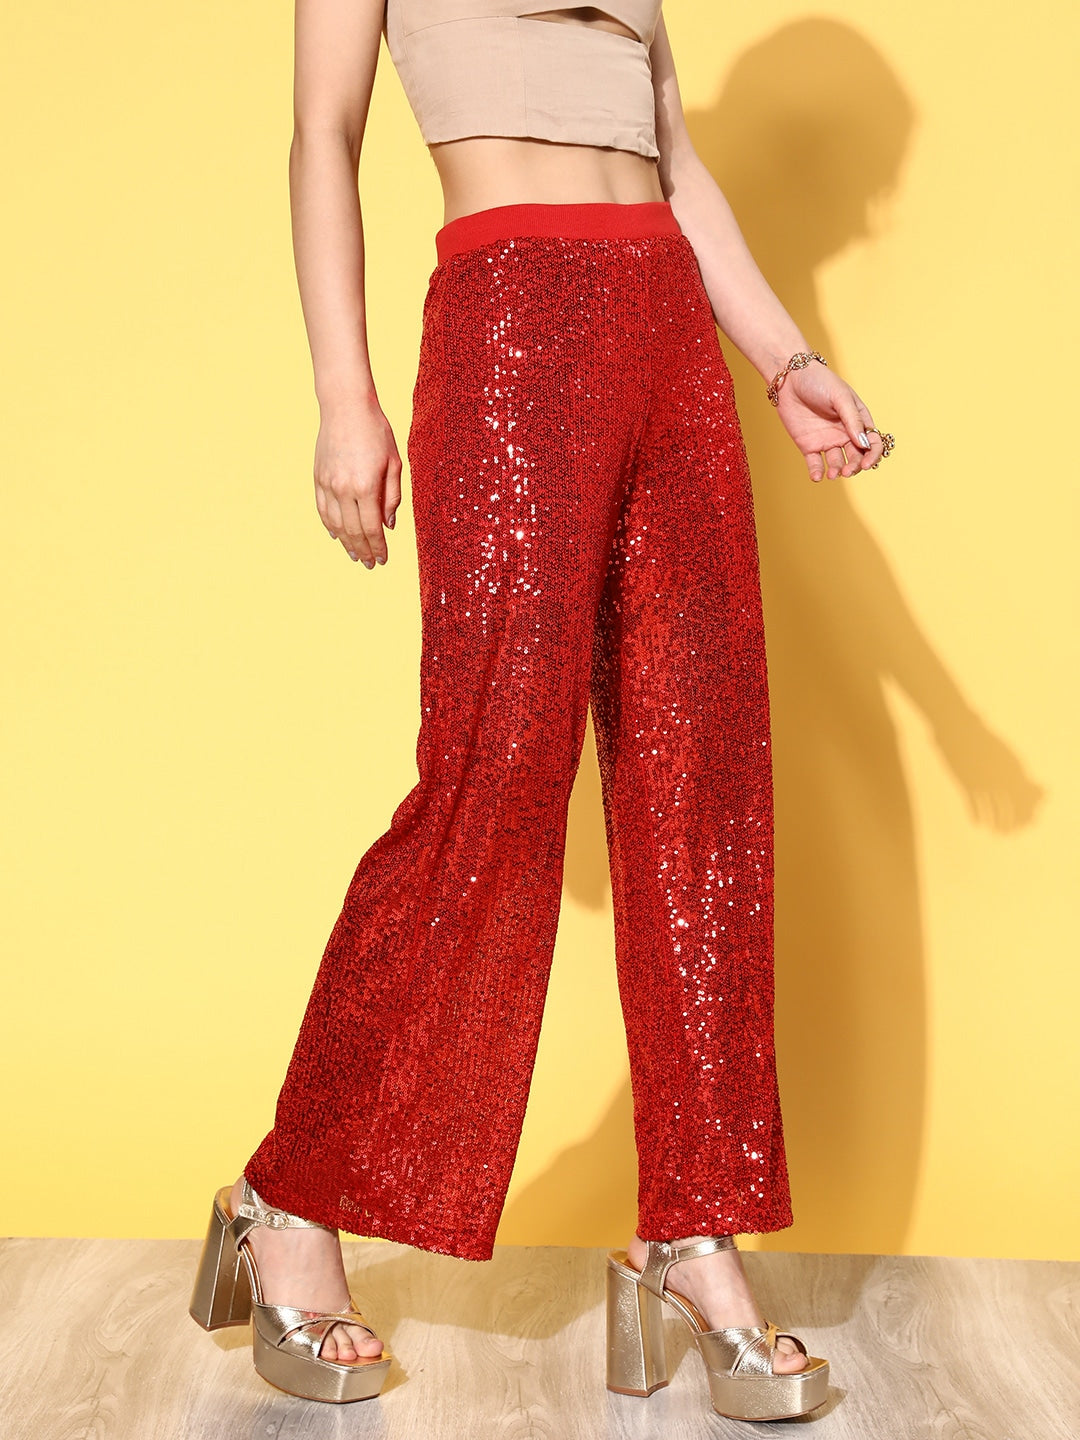 Women's Sequin Pants| Glitter & Sparkly Trousers | ASOS